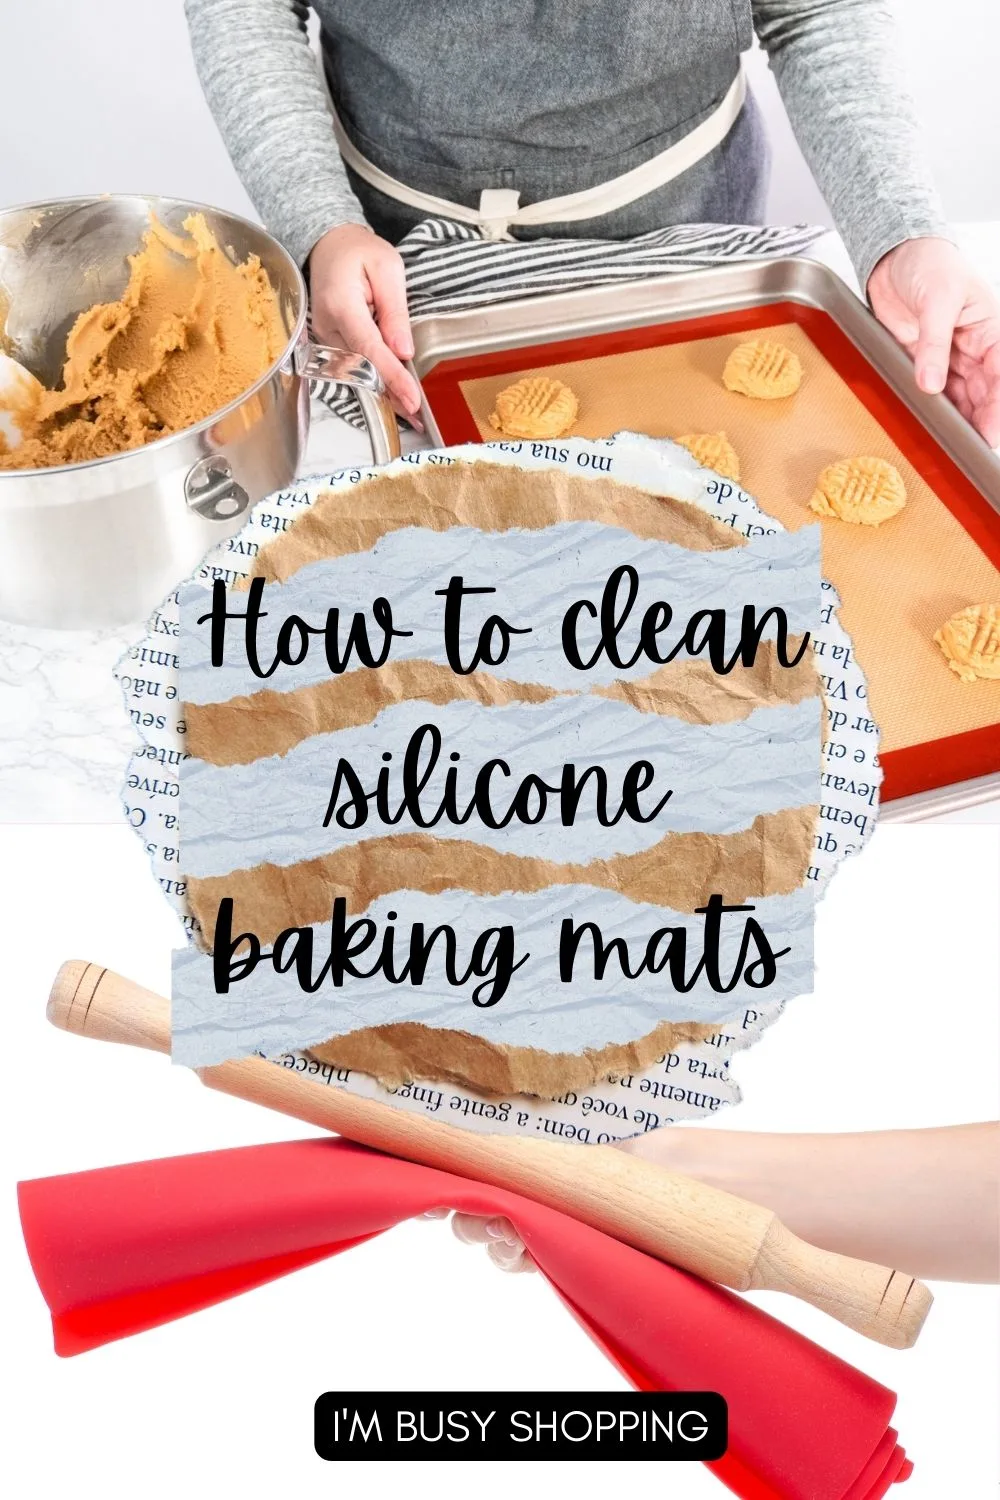 How to Clean Your Silicone Baking Mats - Sally's Baking Addiction